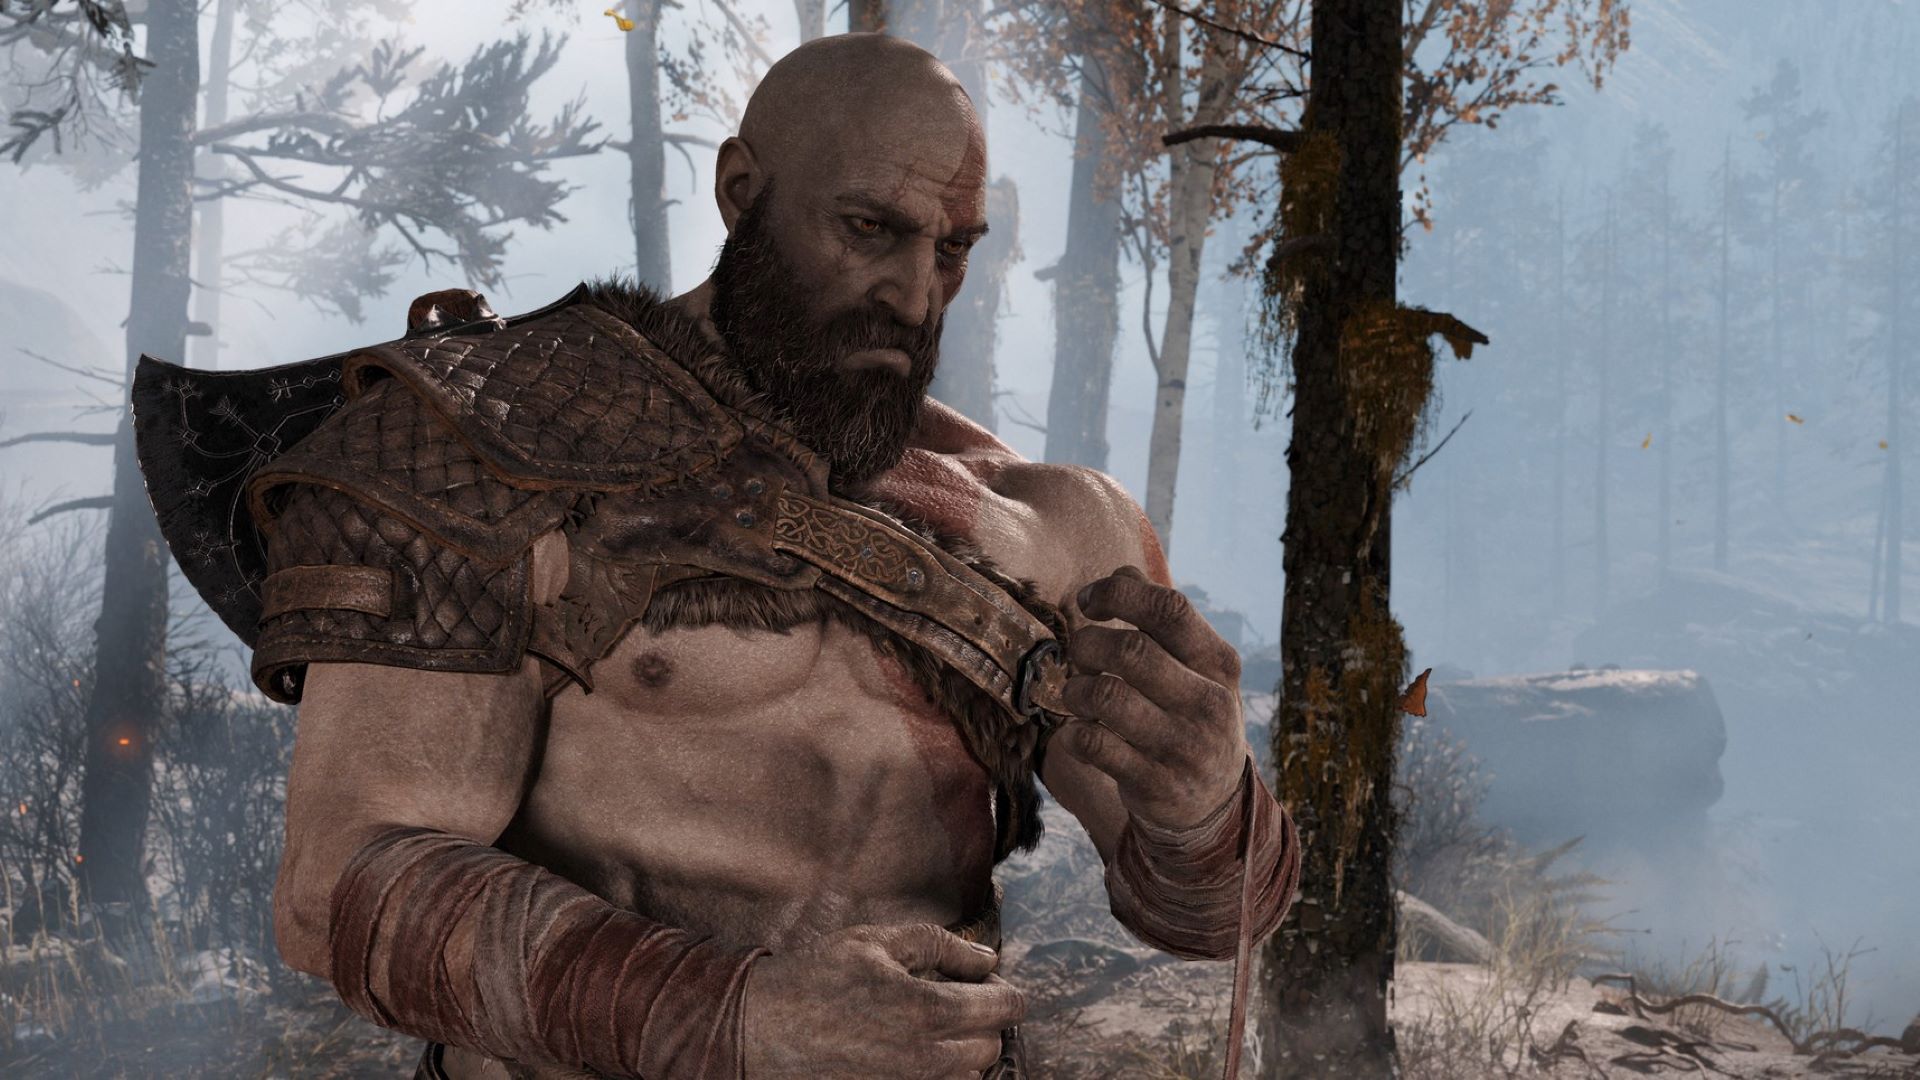 God of War system requirements – DLSS support could lead gaming PCs to victory